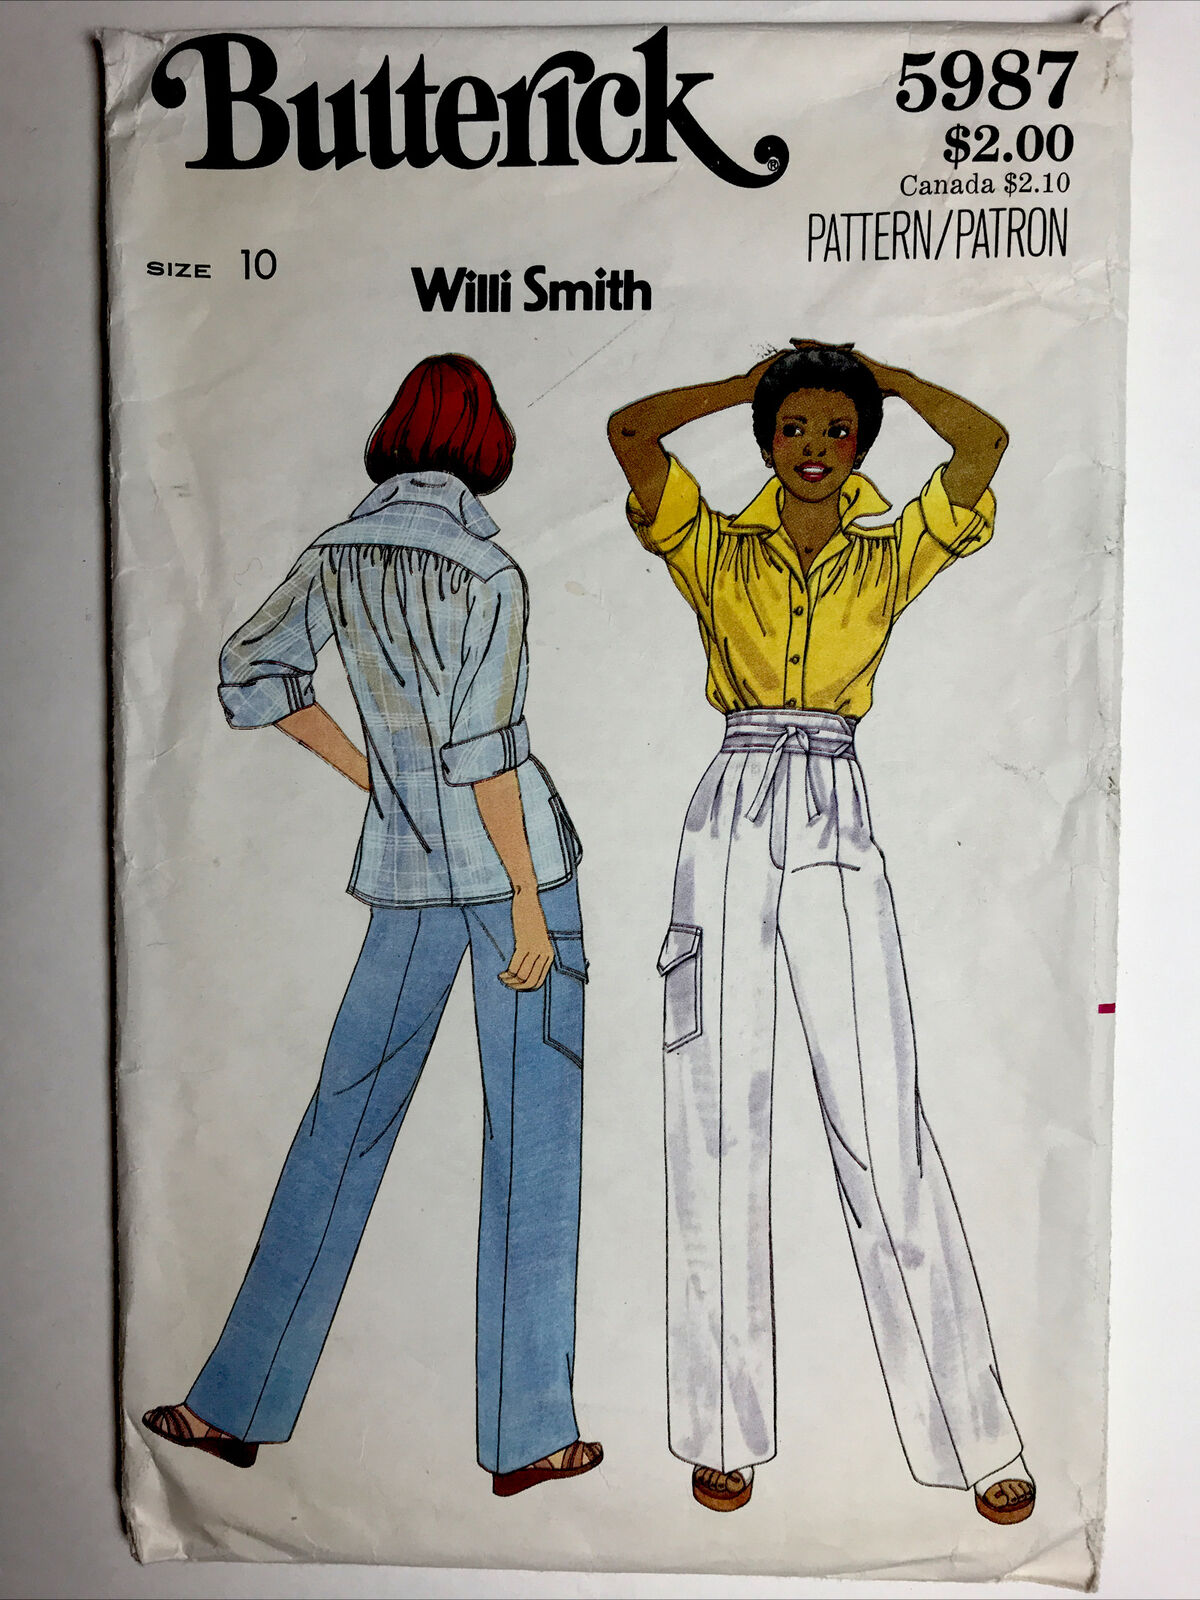 Butterick Willi Smith 5987 Misses PANTS ONLY Size 10 Sewing Pattern